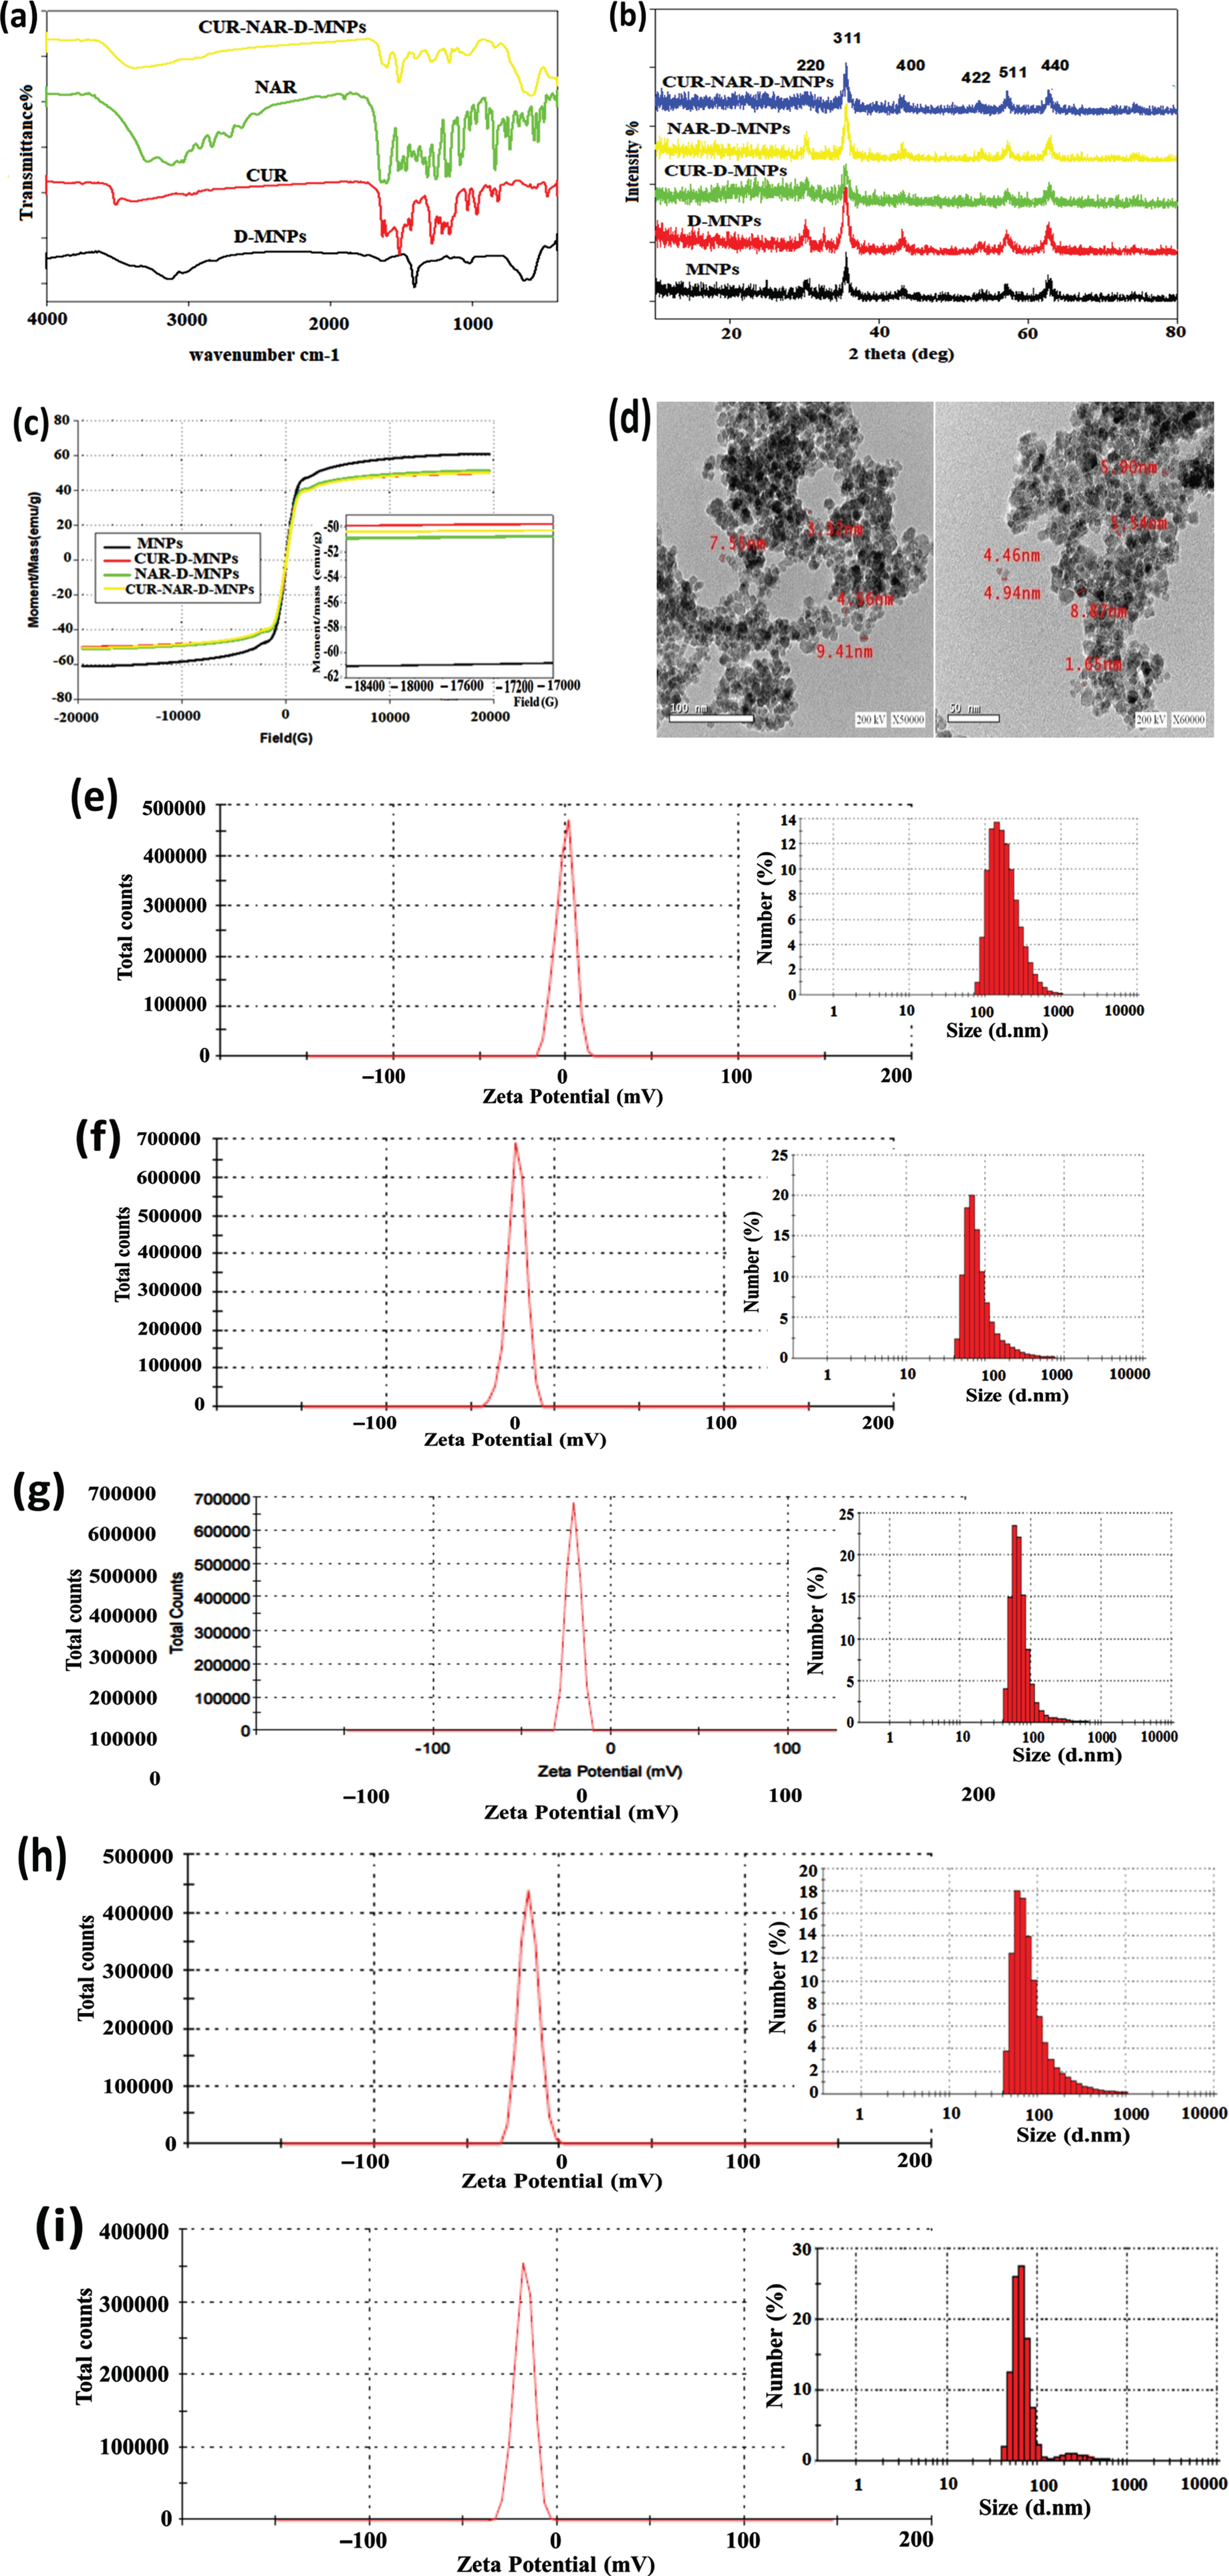 Structural characterization of nanoparticles, (a) FT-IR spectra, (b) XRD analysis, (c) vibrating sample magnetometer (VSM) analysis, (d) TEM micrograph images, (e-i) the hydrodynamic size distributions and zeta potential of the nanoparticles were investigated by DLS analysis. The nano-particles size was about 193 nm in the case of naked MNPs (e). The particle size distribution curves exhibited only one-peak with a relative high polydispersity index indicating the MNPs aggregation in solution. The size of D-MNPs was decreased to 90 nm (f), which could be contributed to the impact of dextran coating on protecting MNPs from aggregation and consequently results in high dispersion capability of MNPs. While the particles size of CUR-D (g), NAR-D (Fig. 1h) and CUR-NAR-D-MNPs (i) are 76, 95 and 88nm, respectively. ZPA estimates the surface charge of nanoparticles and can be indicative to the extent of their stability. Regarding MNPs and D-MNPs, the zeta potential values were –0.896 and –23.1 mV, respectively (e and f). Evidently, coating MNPs with dextran caused a significant decrease in zeta potential. It is considered that the negative value of zeta potential for MNPs pointed out to the existence of OH-groups on the surface of MNPs. Thereby, reducing in surface charge after dextran coating confirming the presence of hydrogen bonding between the O-groups of dextran and hydroxyl group of MNPs. ZPA for CUR-D-MNP –21.2 mV (g), NRG-D-MNP –16.9 mV (h) and CUR-NAR-D-MNP –17.8 mV (i).